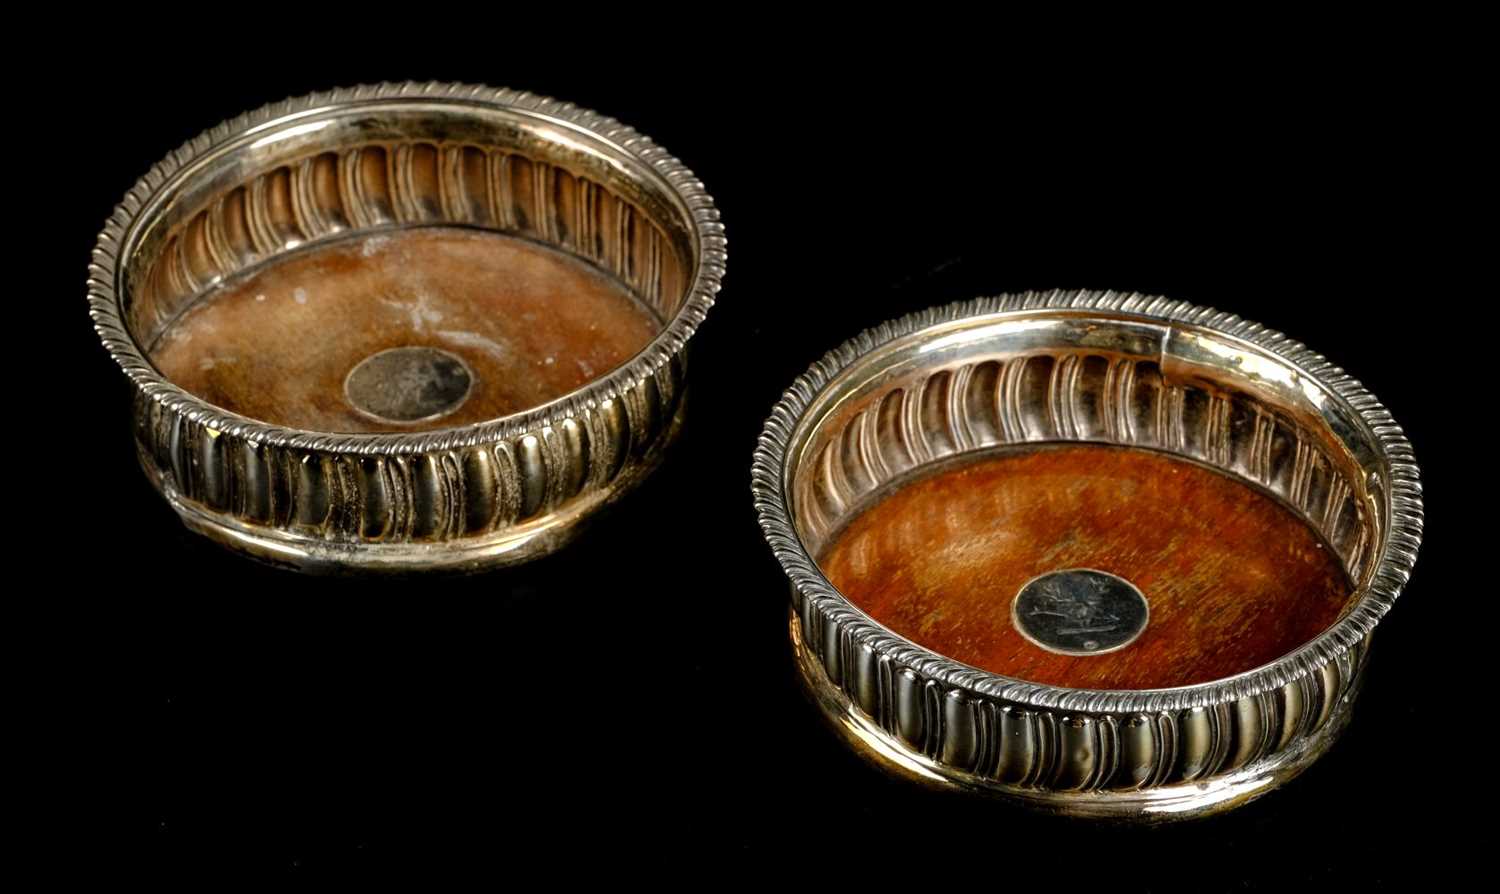 Lot 42 - Coasters. A pair of Georgian silver wine bottle coasters by Thomas Newby, London 1816